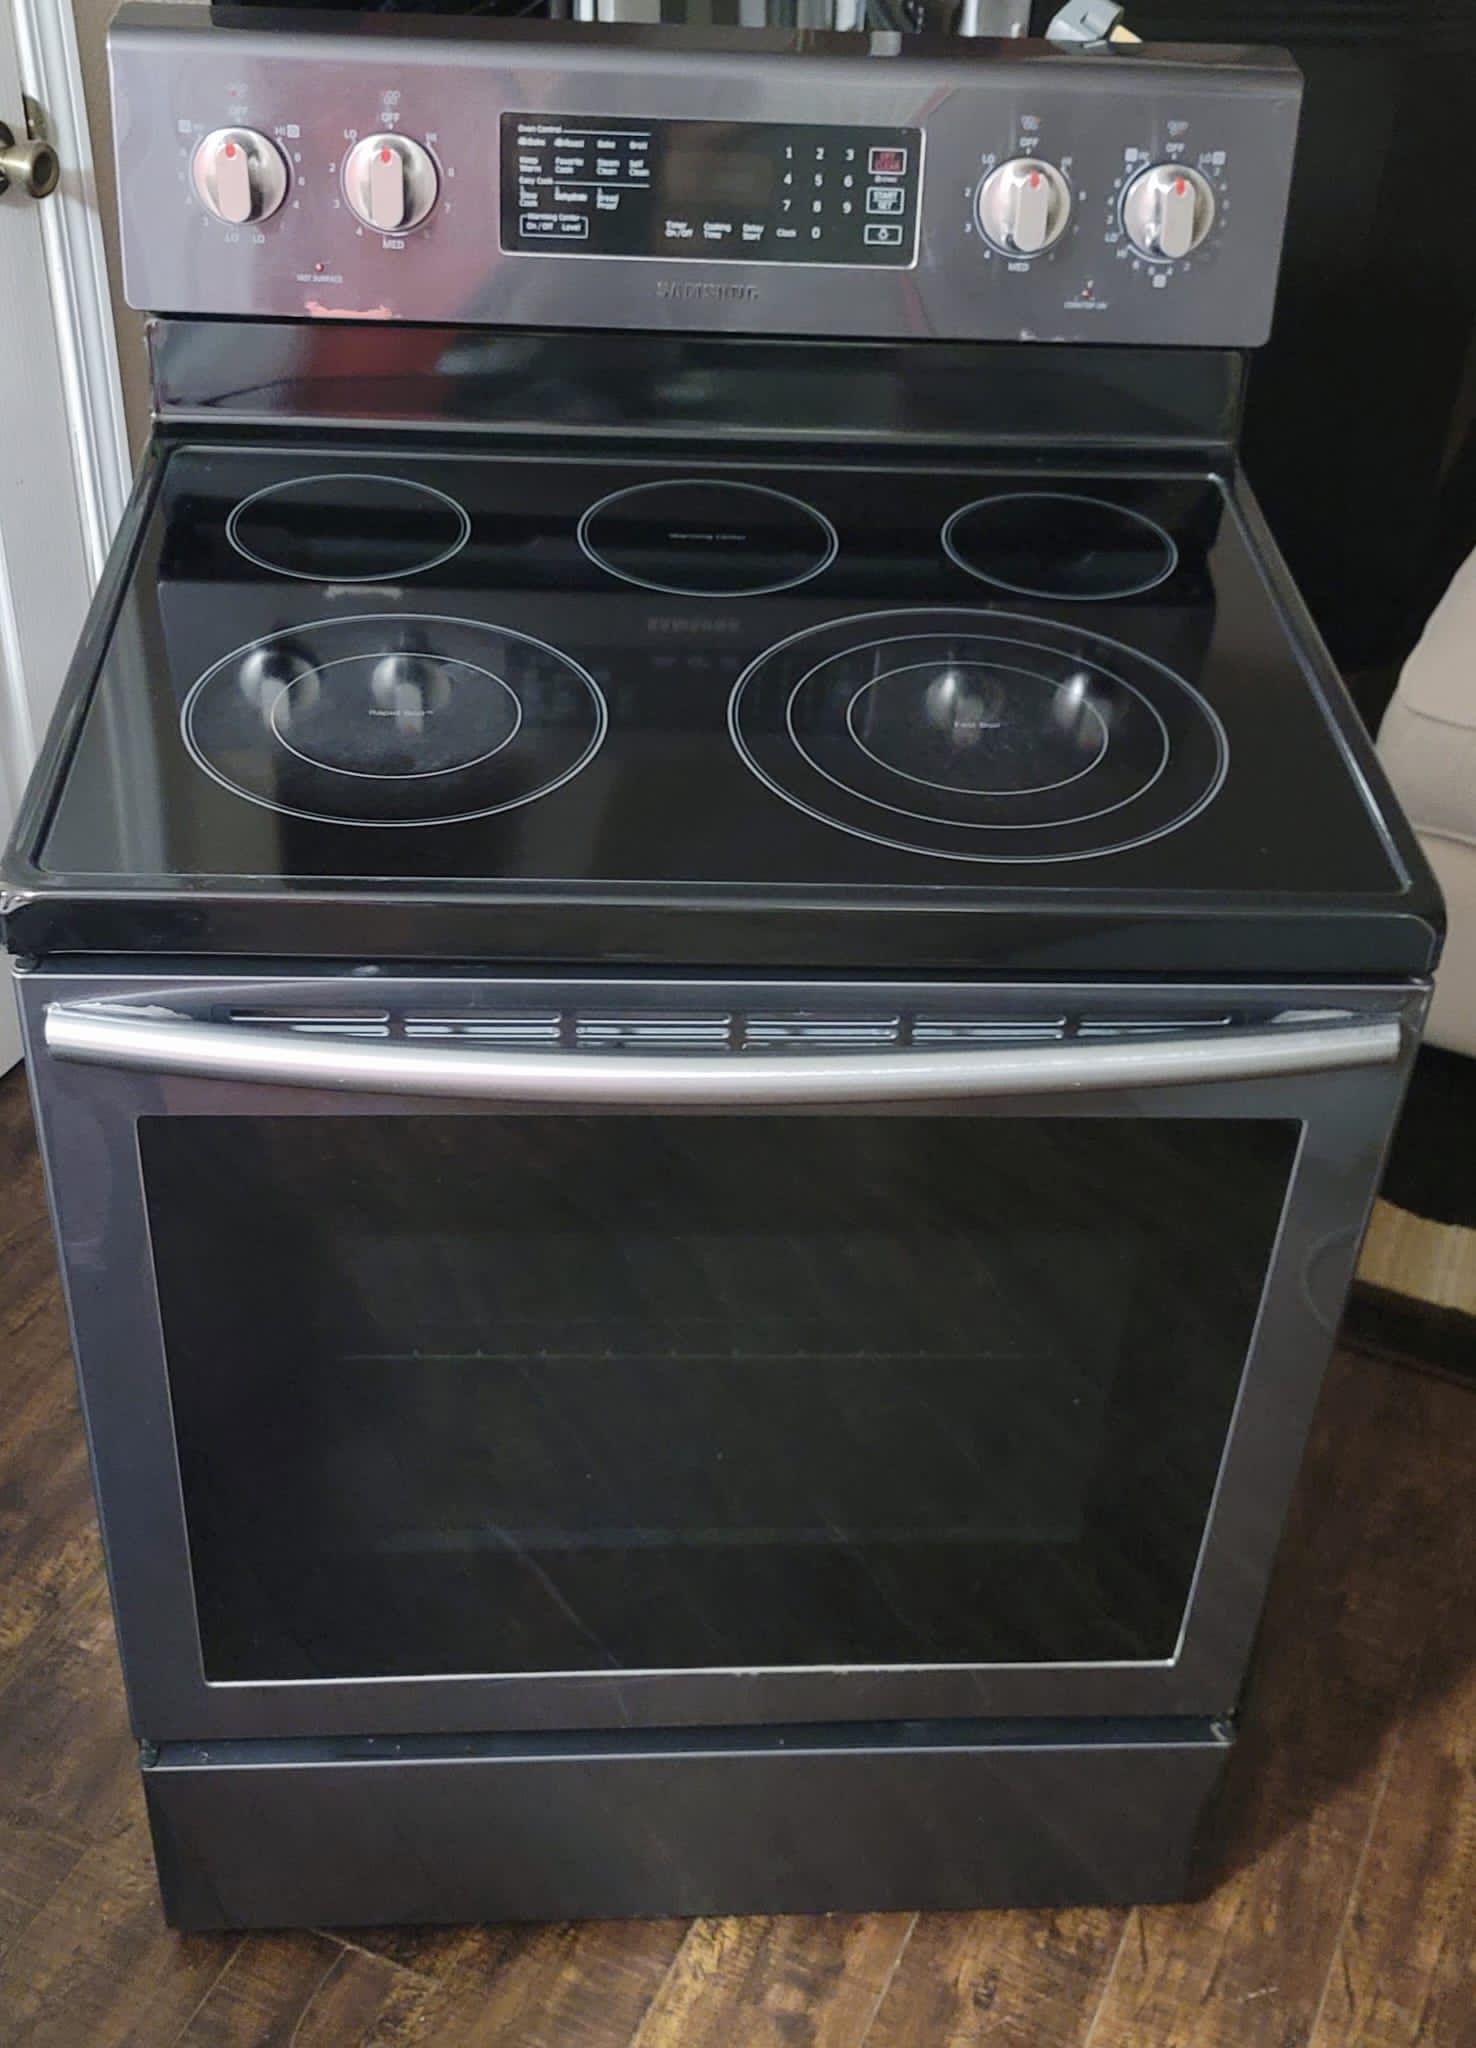 Tramontina 8 Piece Induction Cooking System for Sale in Rancho Cucamonga,  CA - OfferUp